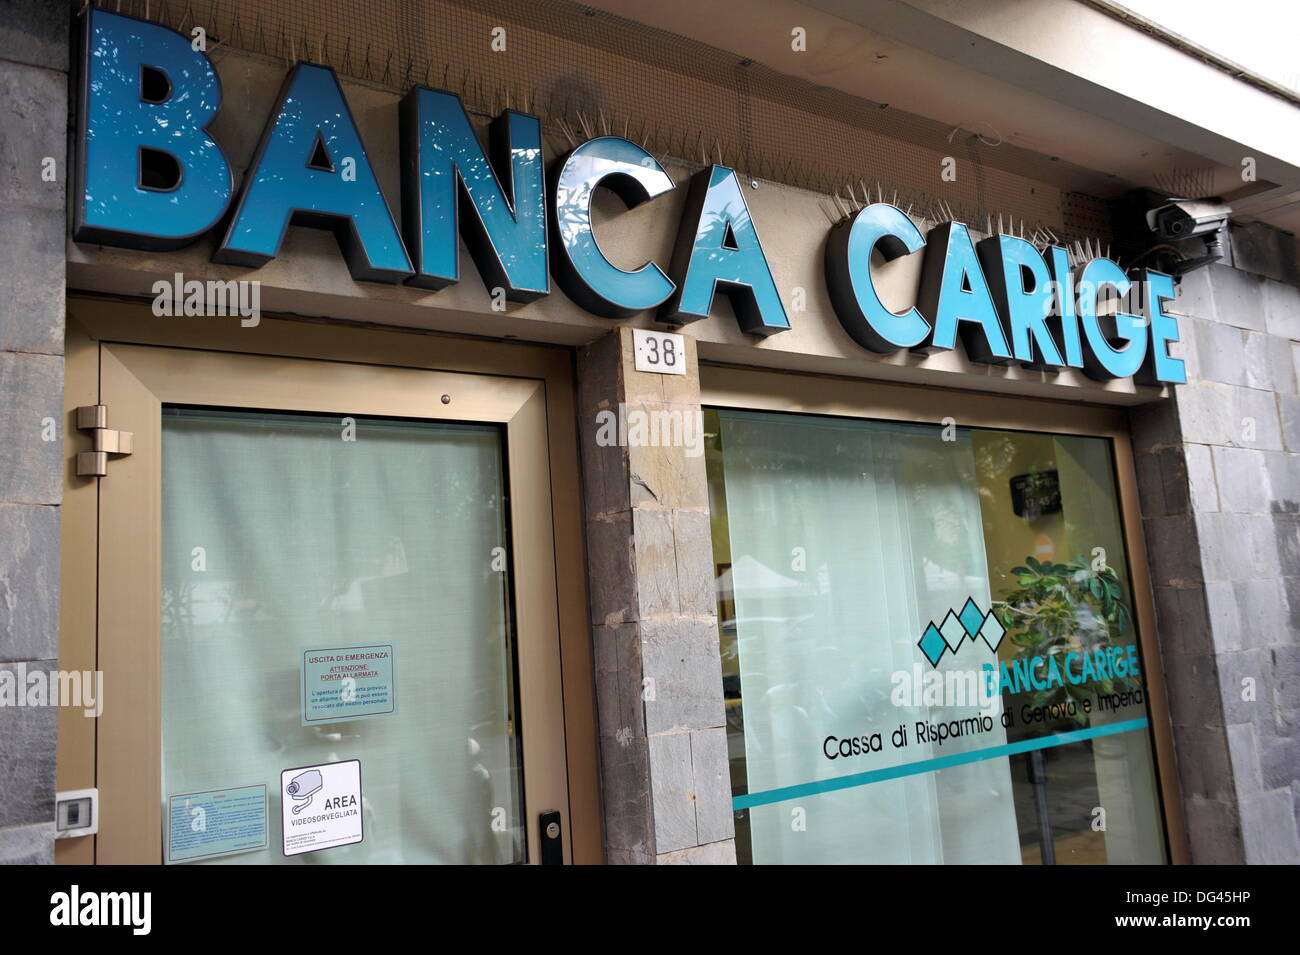 Branch office of the italian bank "Banca Carige" in Lavagna  (Liguria/Italy), September 11, 2013 Stock Photo - Alamy